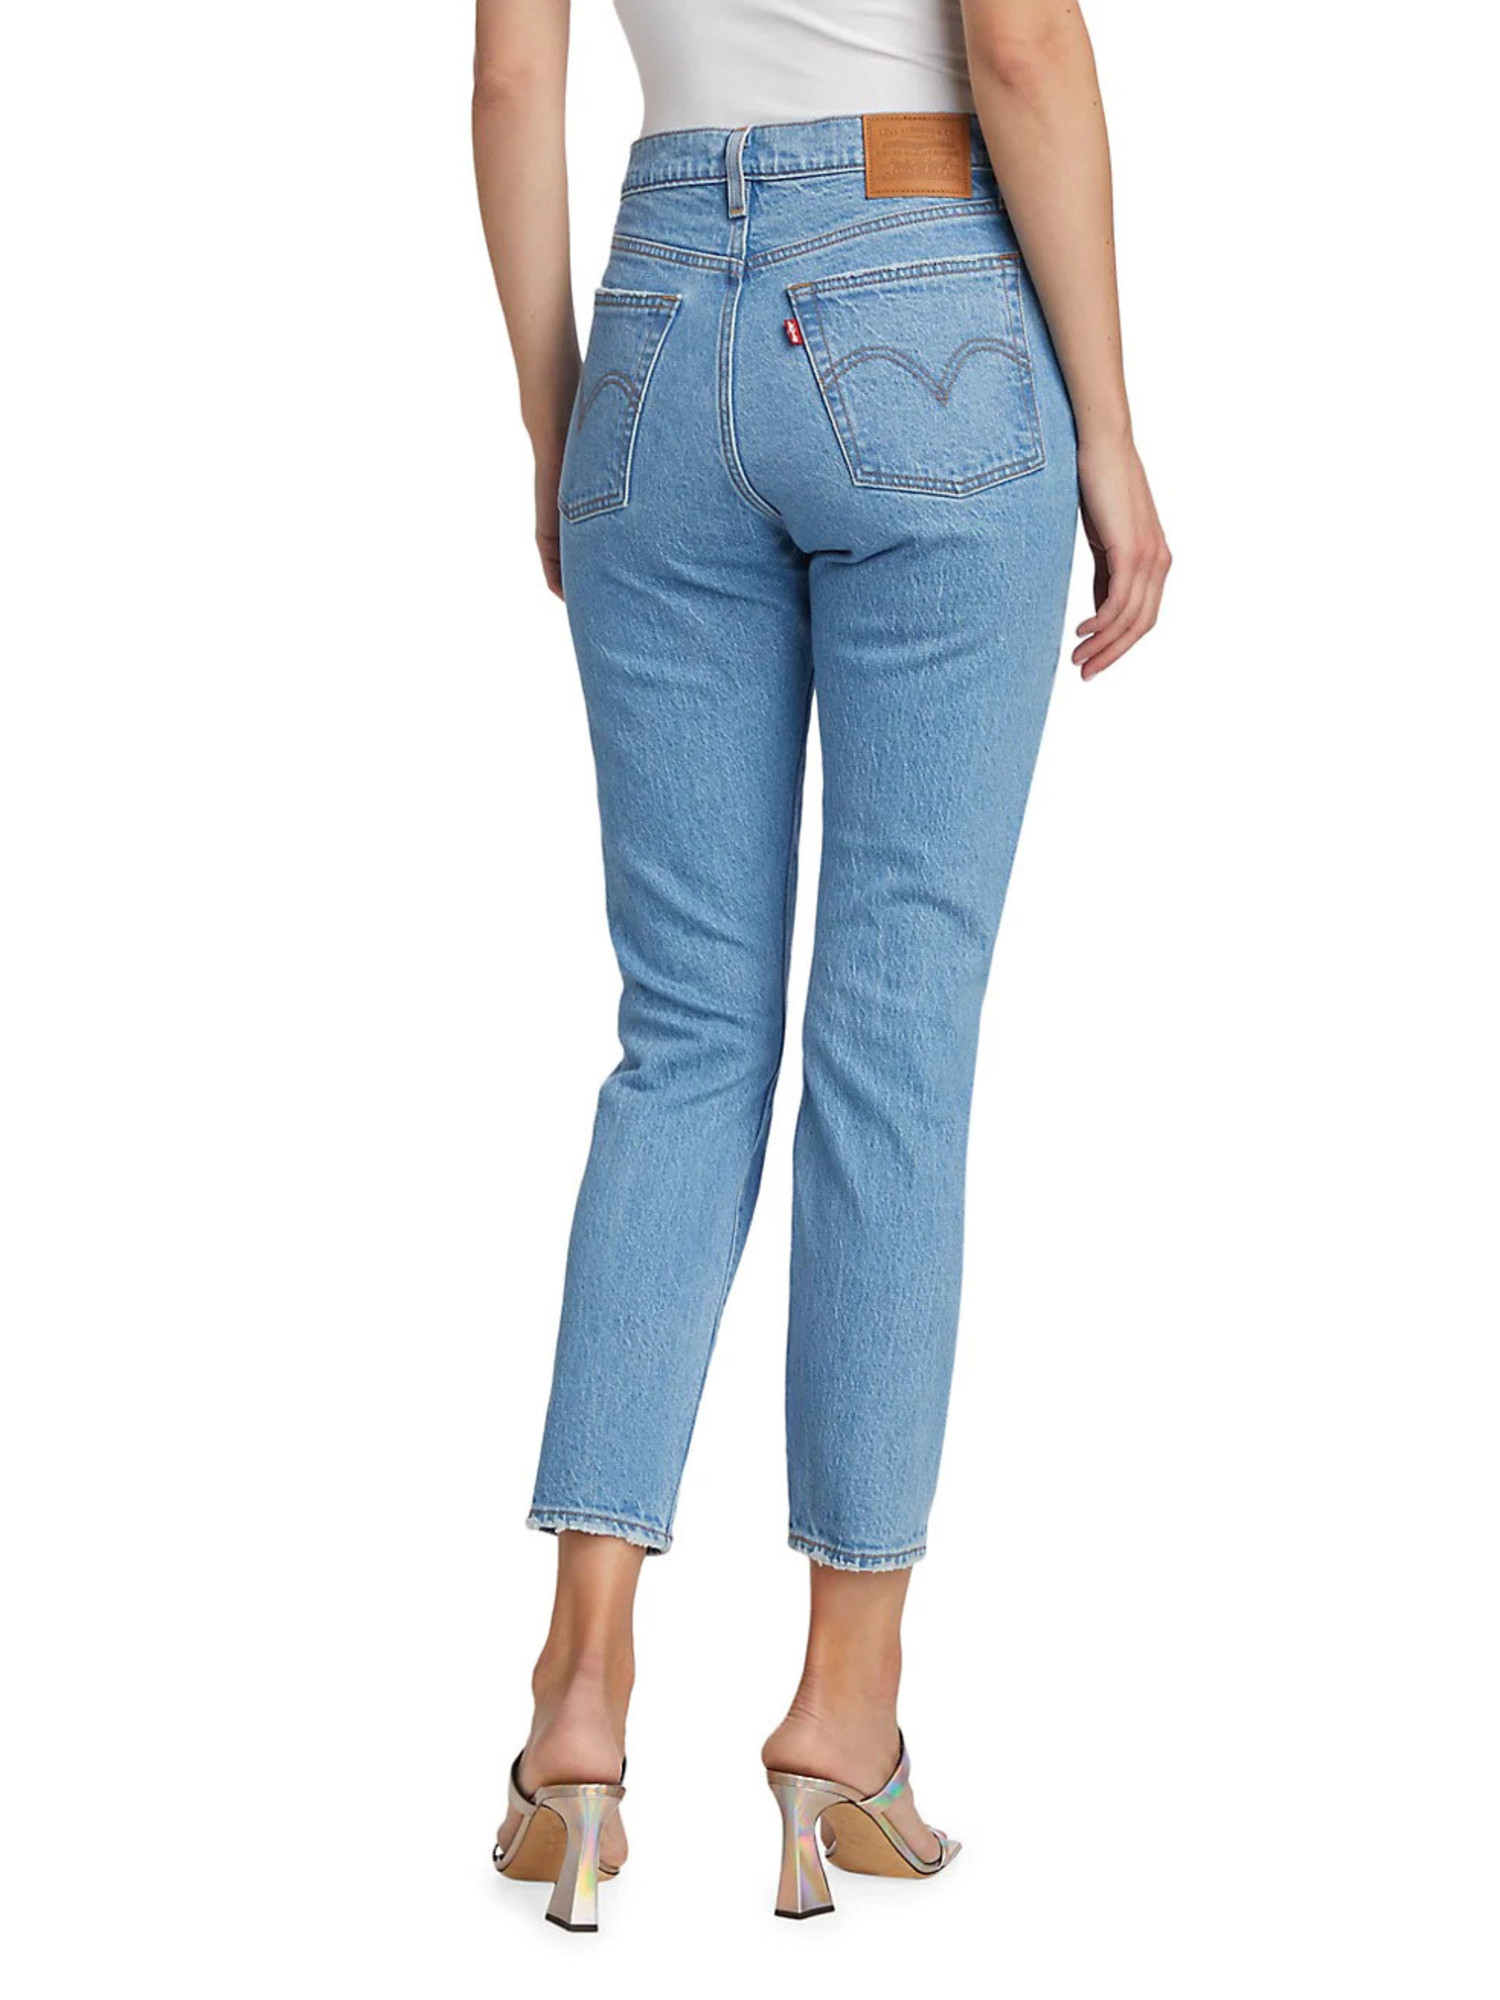 Levi's Denim | Wedgie Icon Fit - Jazz Devoted - Tryst Boutique